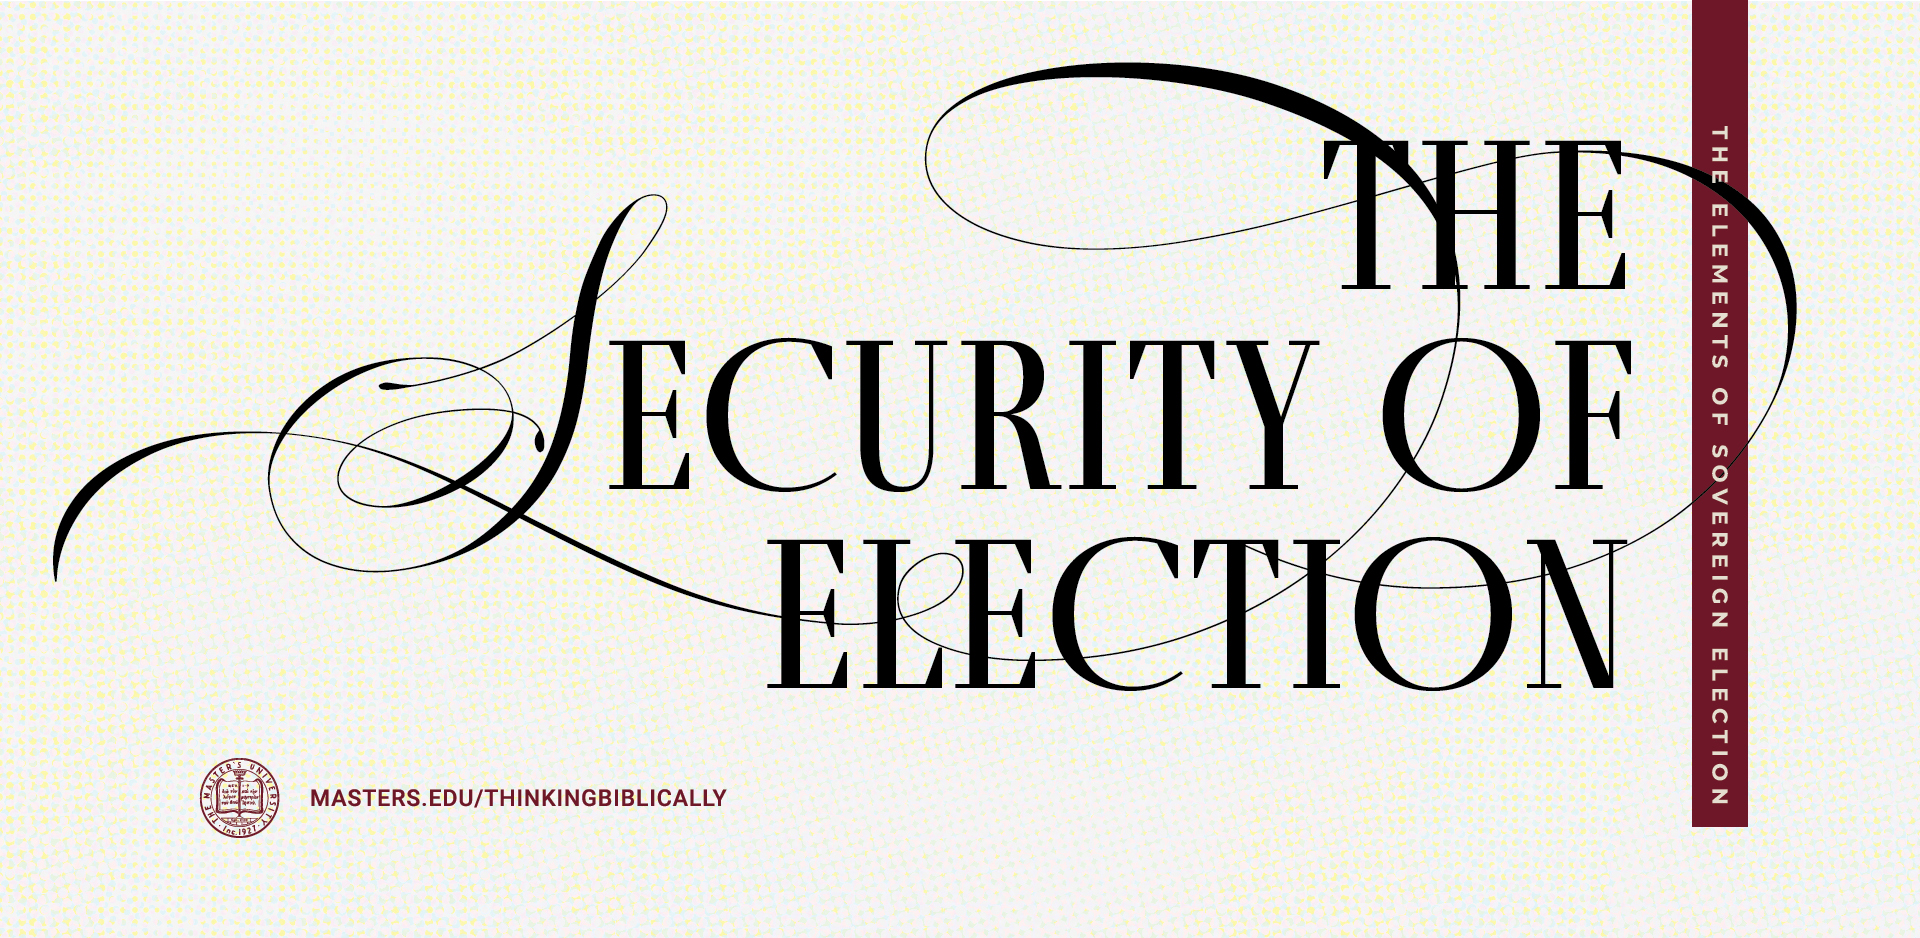 The Security of Election Featured Image